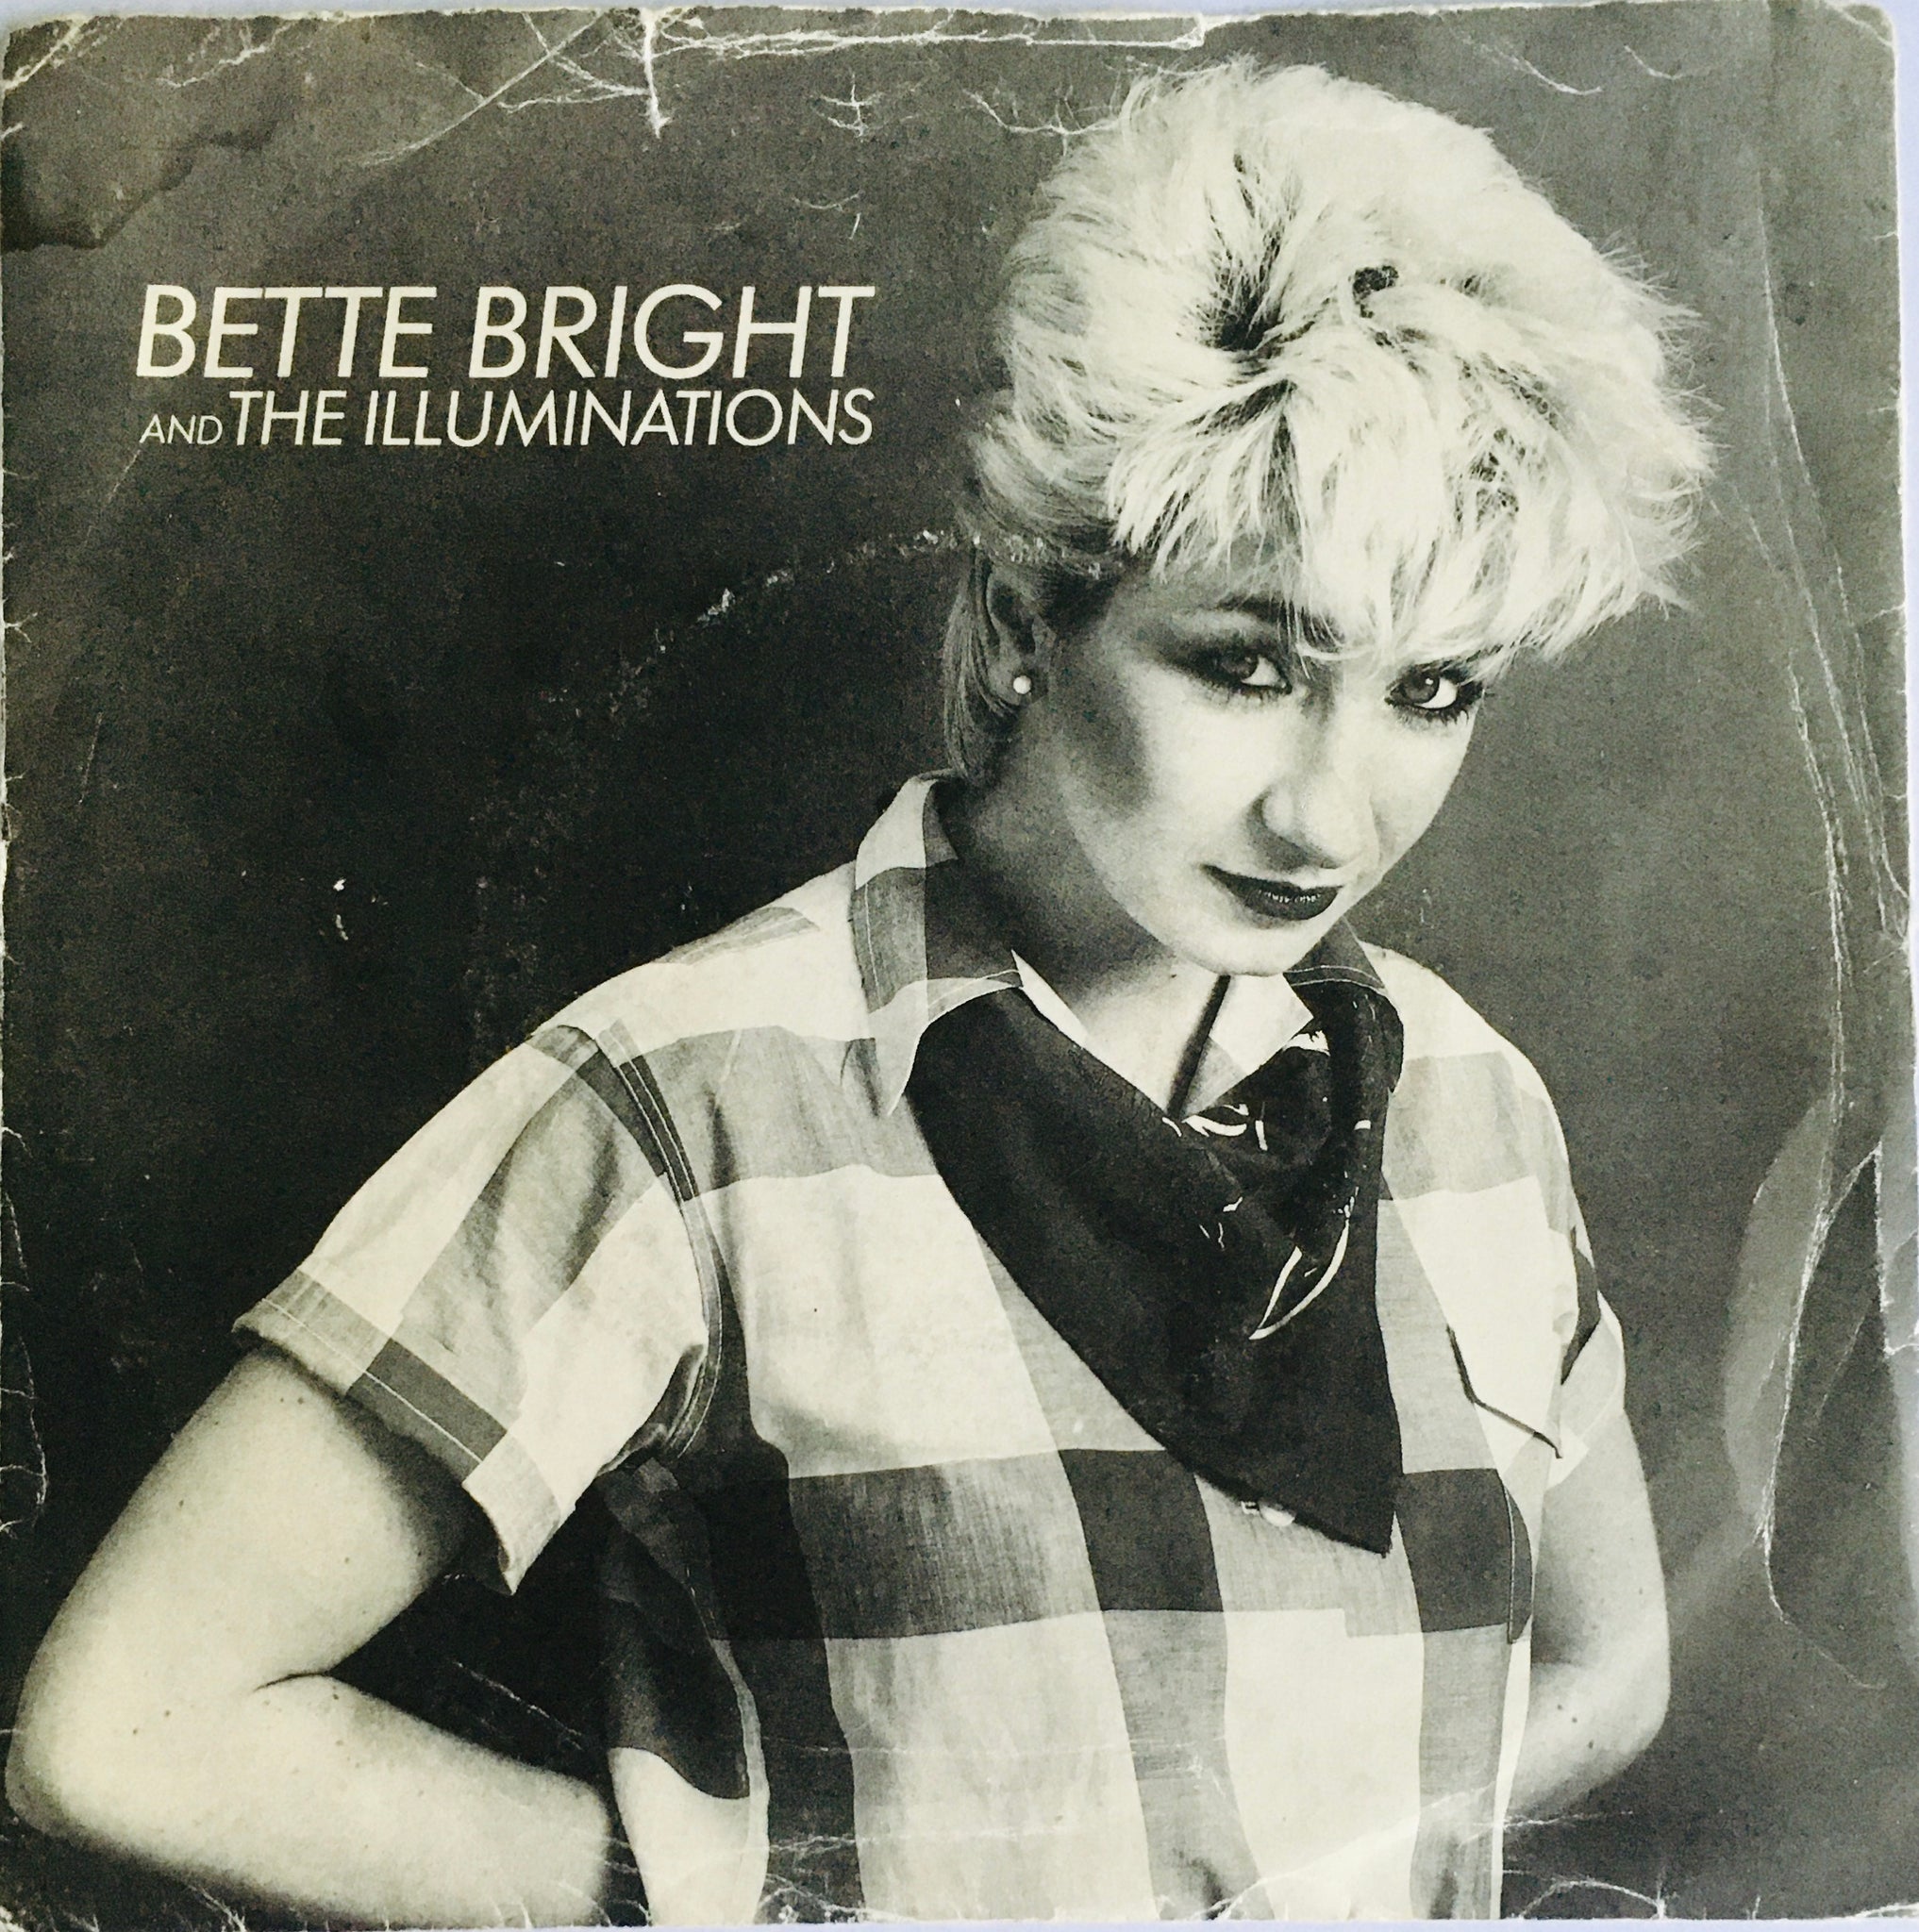 Bette Bright And The Illuminations "Some Girls Have All The Luck" Single (1981)